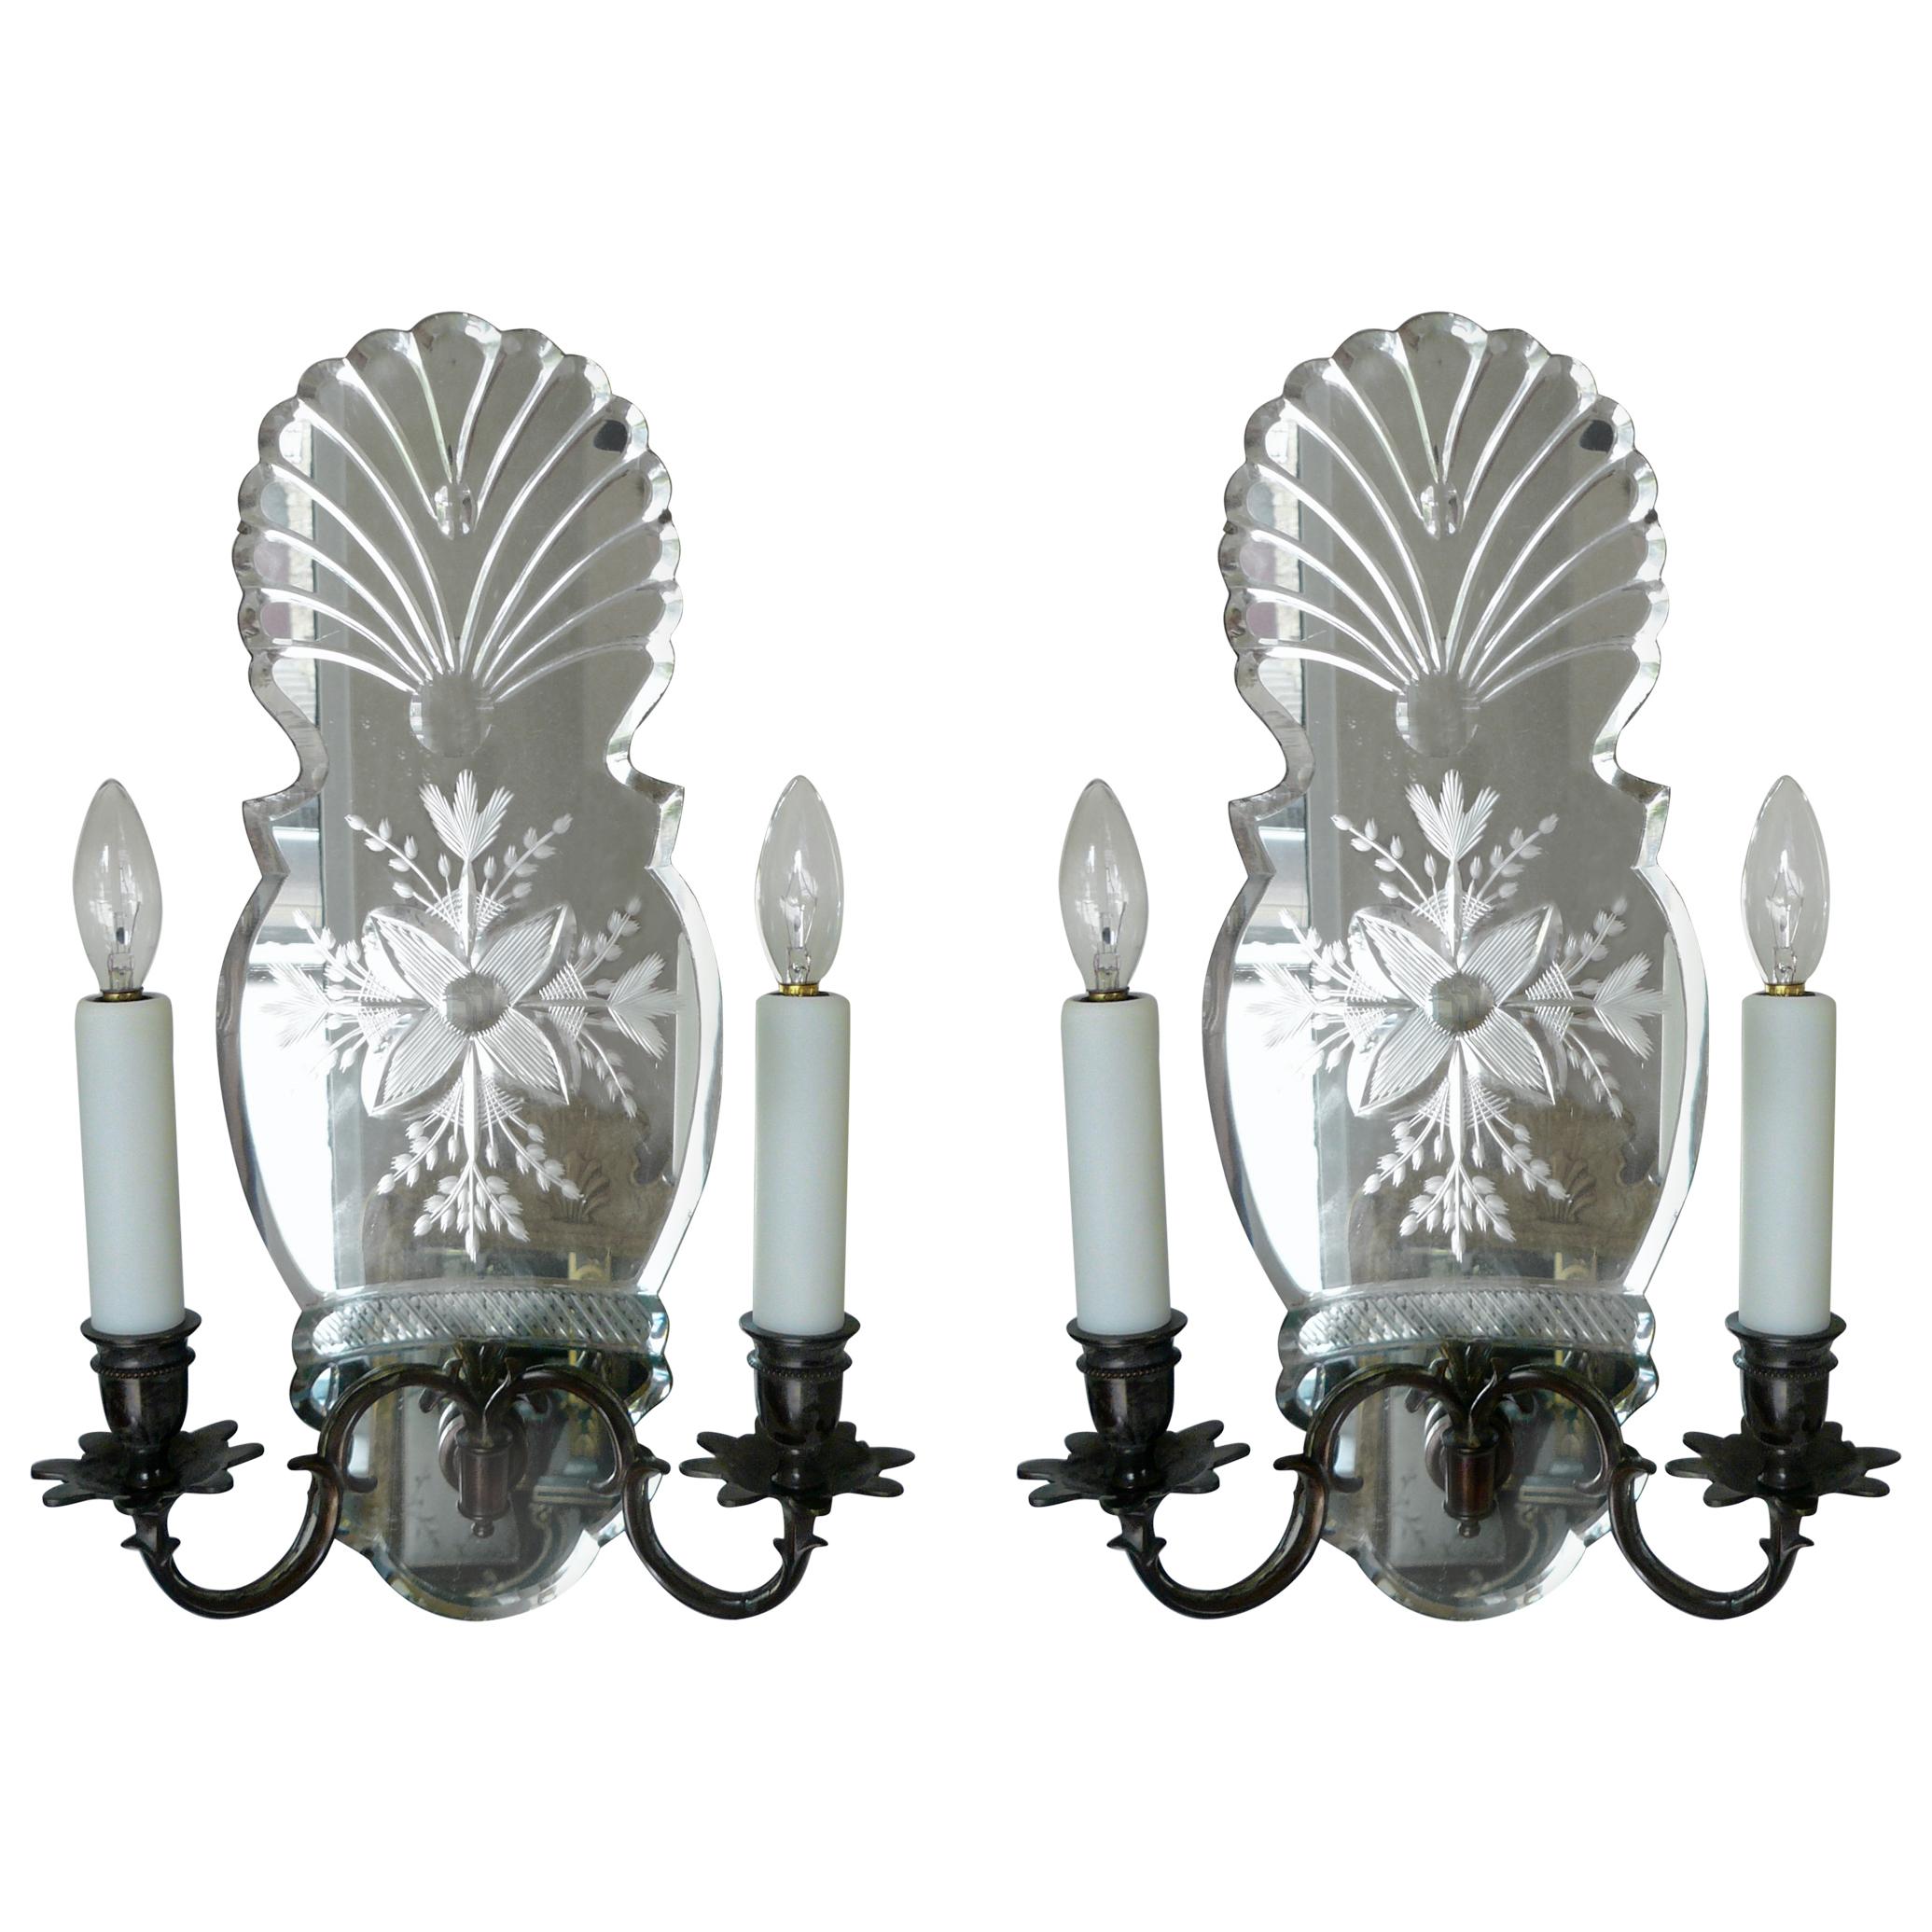 Pair of Early Georgian Style Wheel Cut Mirror Back Two-Light Sconces